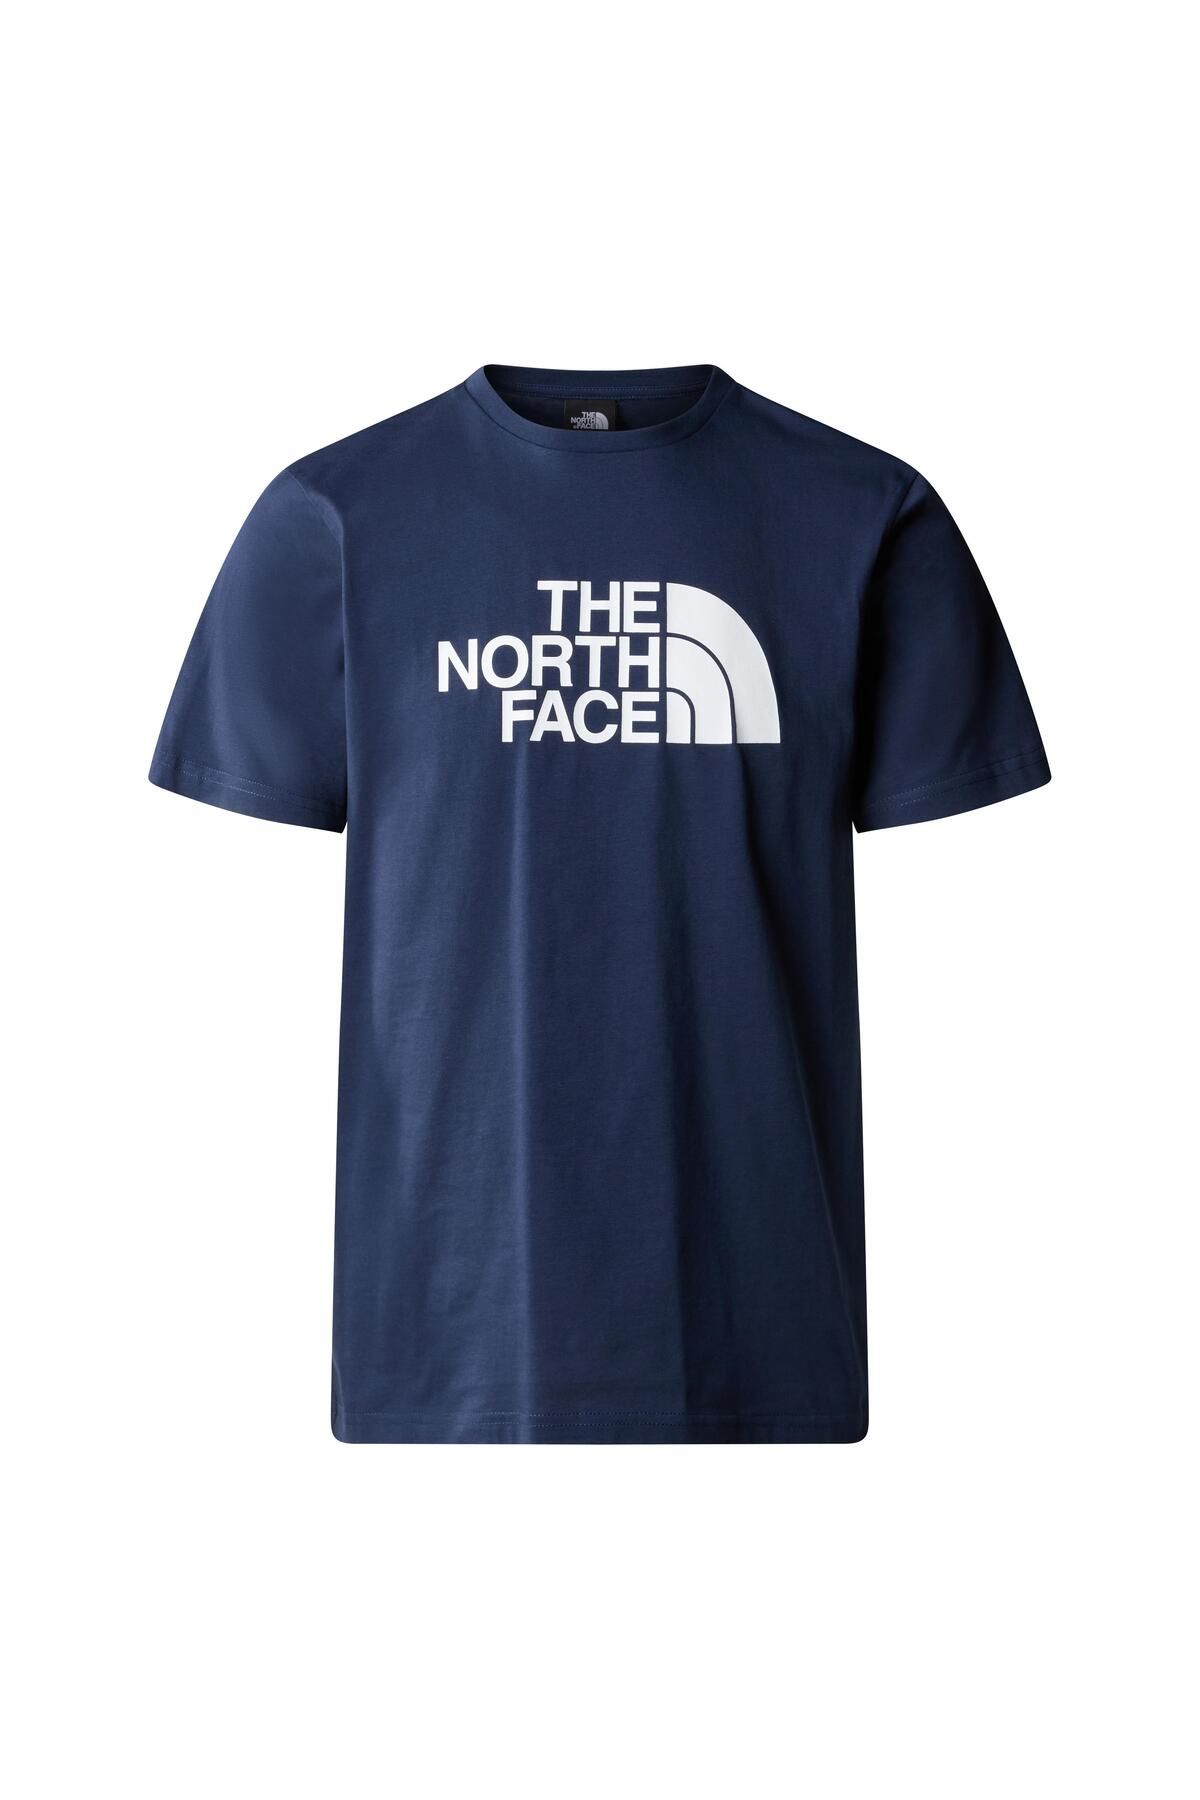 The North Face M S/S EASY TEE Navy